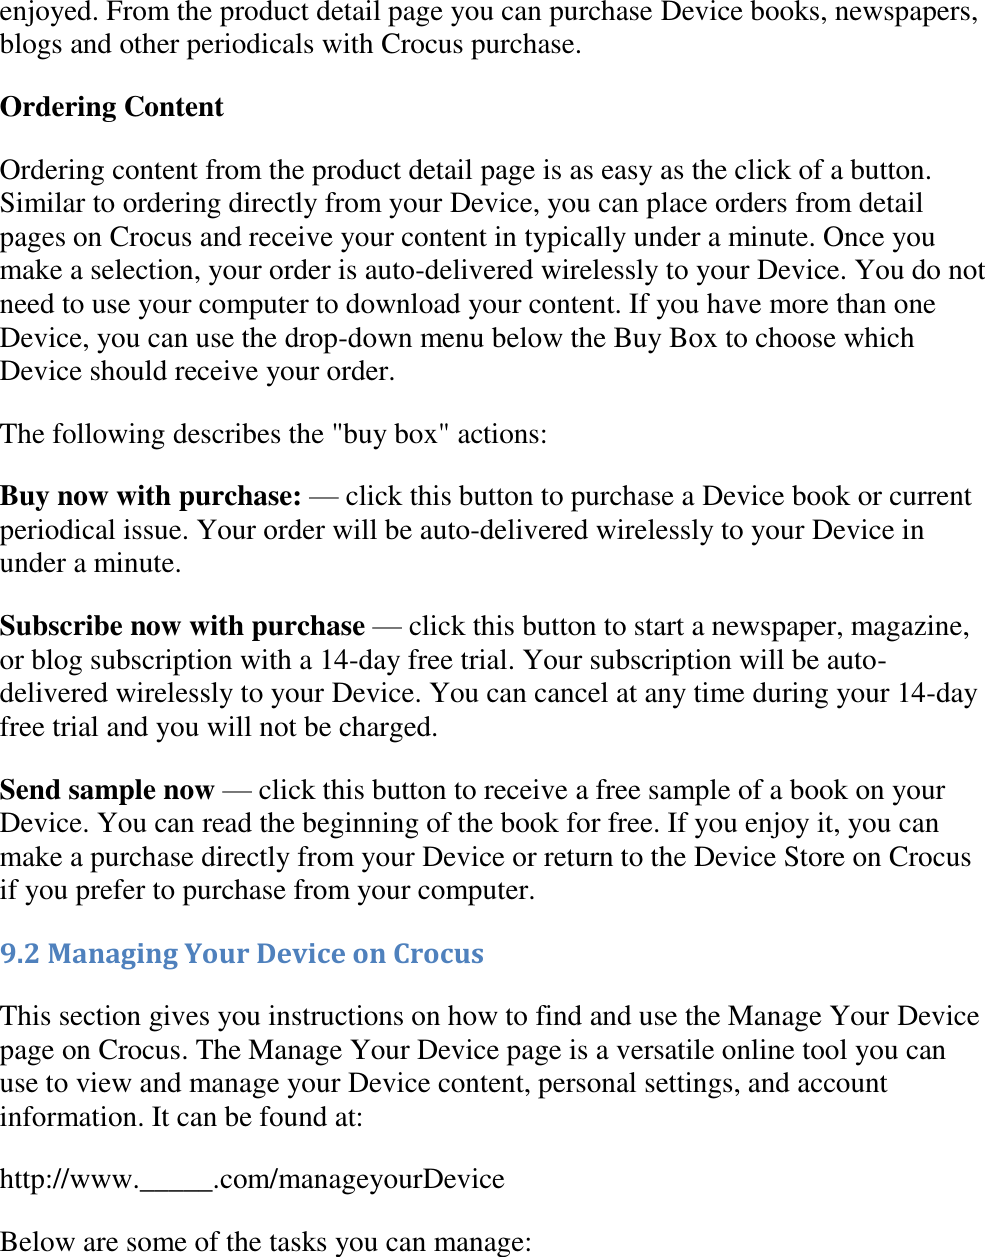   enjoyed. From the product detail page you can purchase Device books, newspapers, blogs and other periodicals with Crocus purchase. Ordering Content Ordering content from the product detail page is as easy as the click of a button. Similar to ordering directly from your Device, you can place orders from detail pages on Crocus and receive your content in typically under a minute. Once you make a selection, your order is auto-delivered wirelessly to your Device. You do not need to use your computer to download your content. If you have more than one Device, you can use the drop-down menu below the Buy Box to choose which Device should receive your order. The following describes the &quot;buy box&quot; actions: Buy now with purchase: — click this button to purchase a Device book or current periodical issue. Your order will be auto-delivered wirelessly to your Device in under a minute. Subscribe now with purchase — click this button to start a newspaper, magazine, or blog subscription with a 14-day free trial. Your subscription will be auto-delivered wirelessly to your Device. You can cancel at any time during your 14-day free trial and you will not be charged. Send sample now — click this button to receive a free sample of a book on your Device. You can read the beginning of the book for free. If you enjoy it, you can make a purchase directly from your Device or return to the Device Store on Crocus if you prefer to purchase from your computer. 9.2 Managing Your Device on Crocus This section gives you instructions on how to find and use the Manage Your Device page on Crocus. The Manage Your Device page is a versatile online tool you can use to view and manage your Device content, personal settings, and account information. It can be found at: http://www._____.com/manageyourDevice Below are some of the tasks you can manage: 